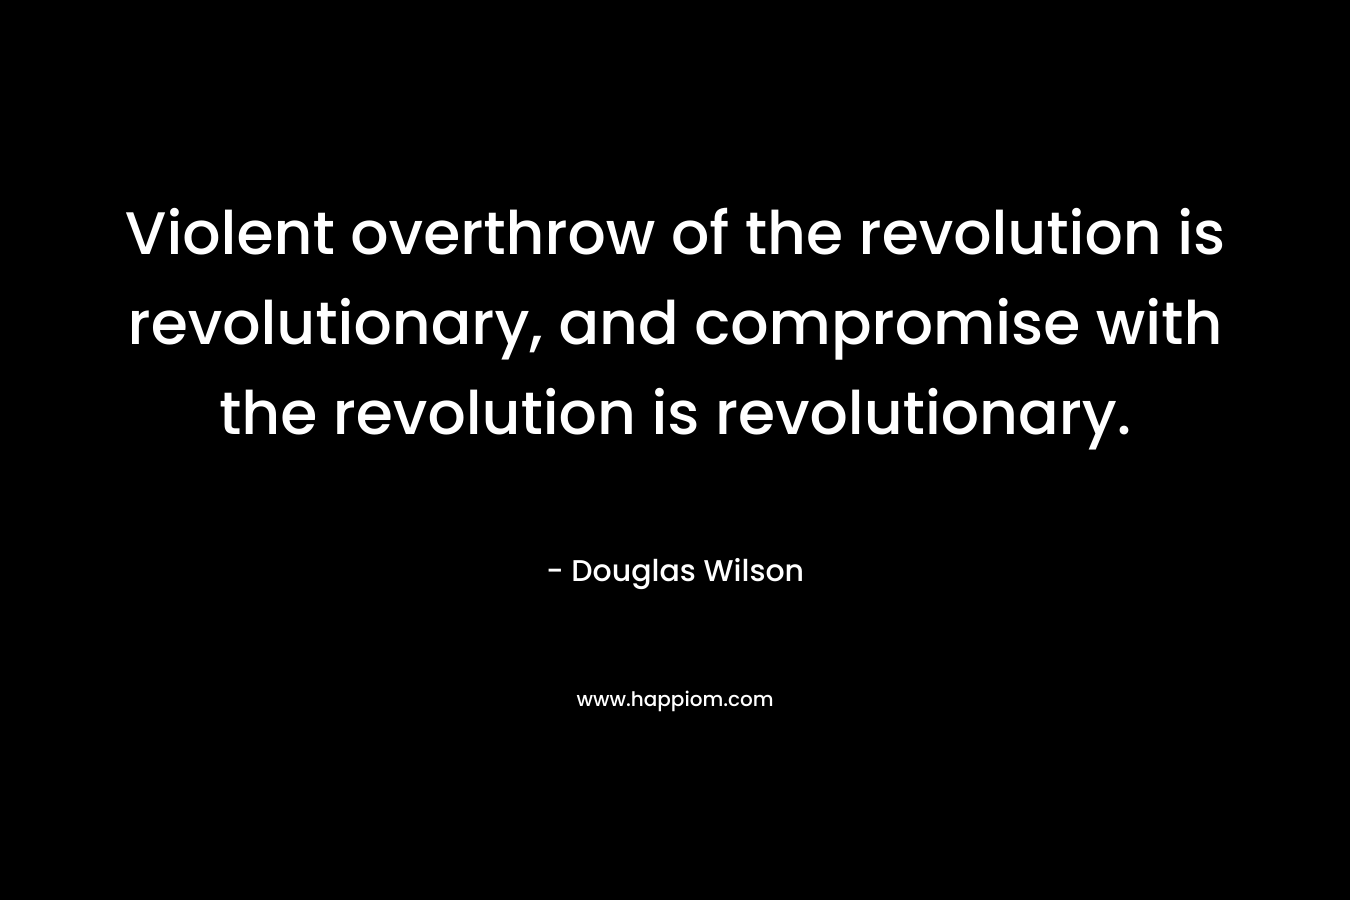 Violent overthrow of the revolution is revolutionary, and compromise with the revolution is revolutionary.